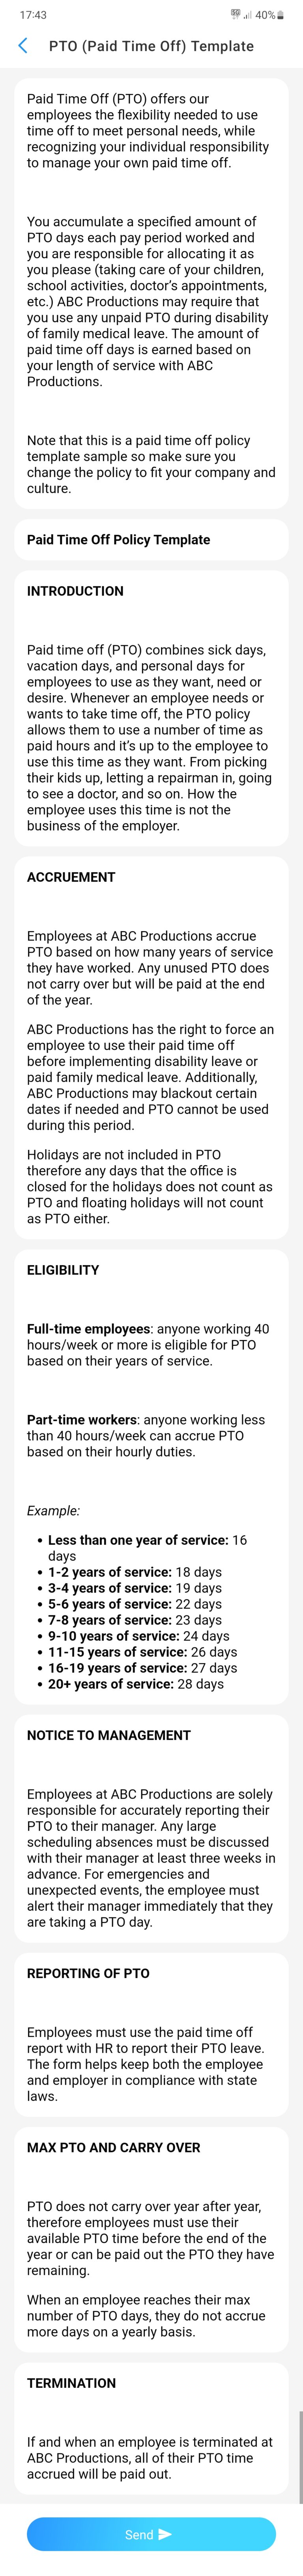 PTO-paid time off policy template - mobile view